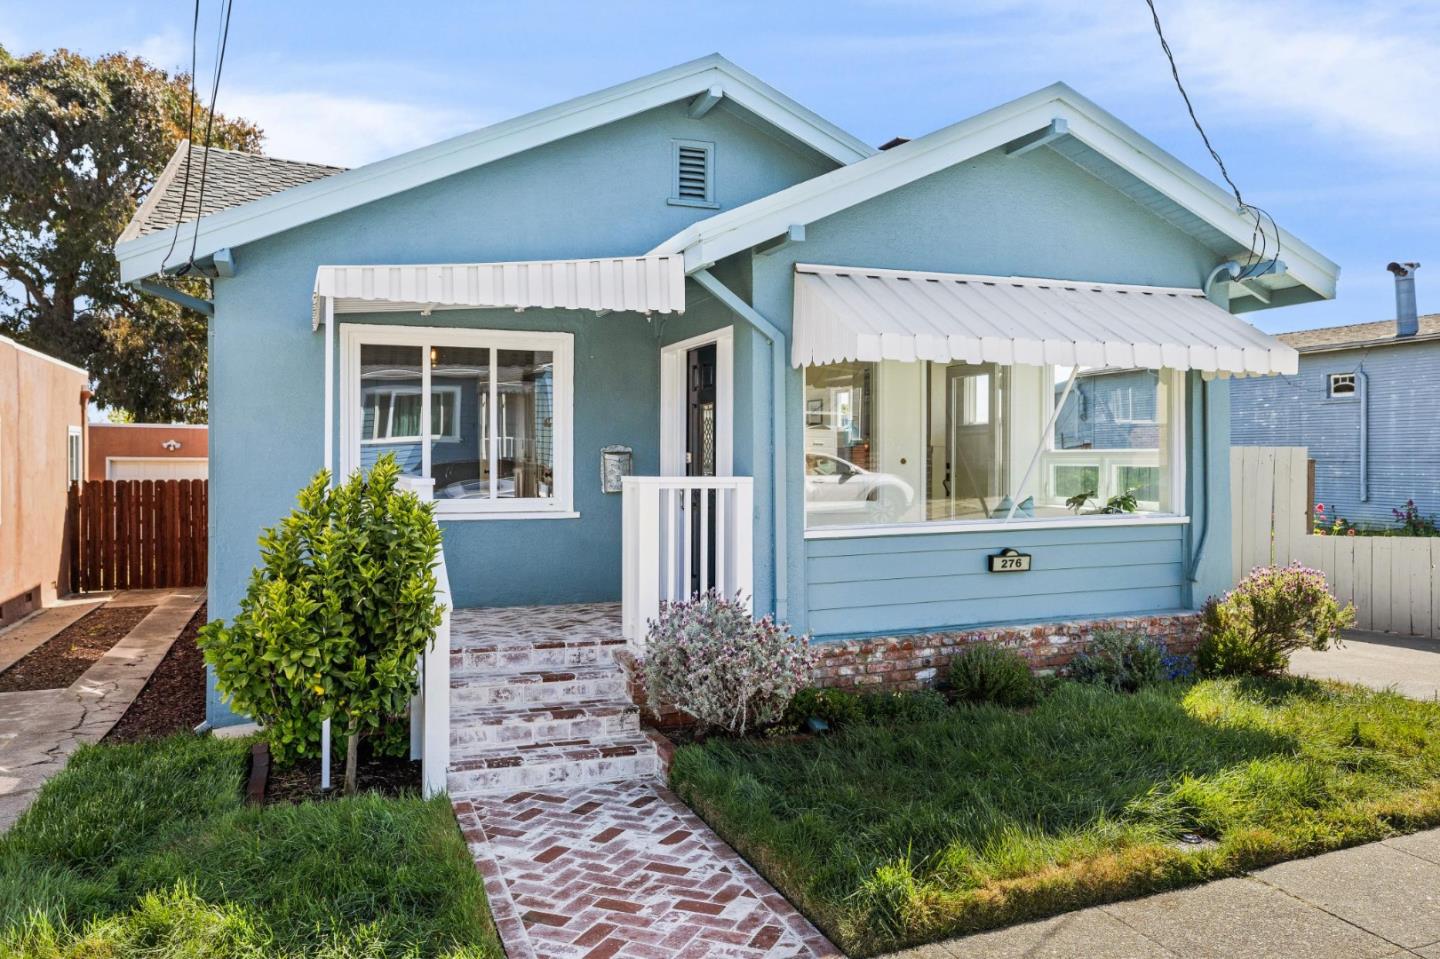 Photo of 276 Linden Ave in San Bruno, CA